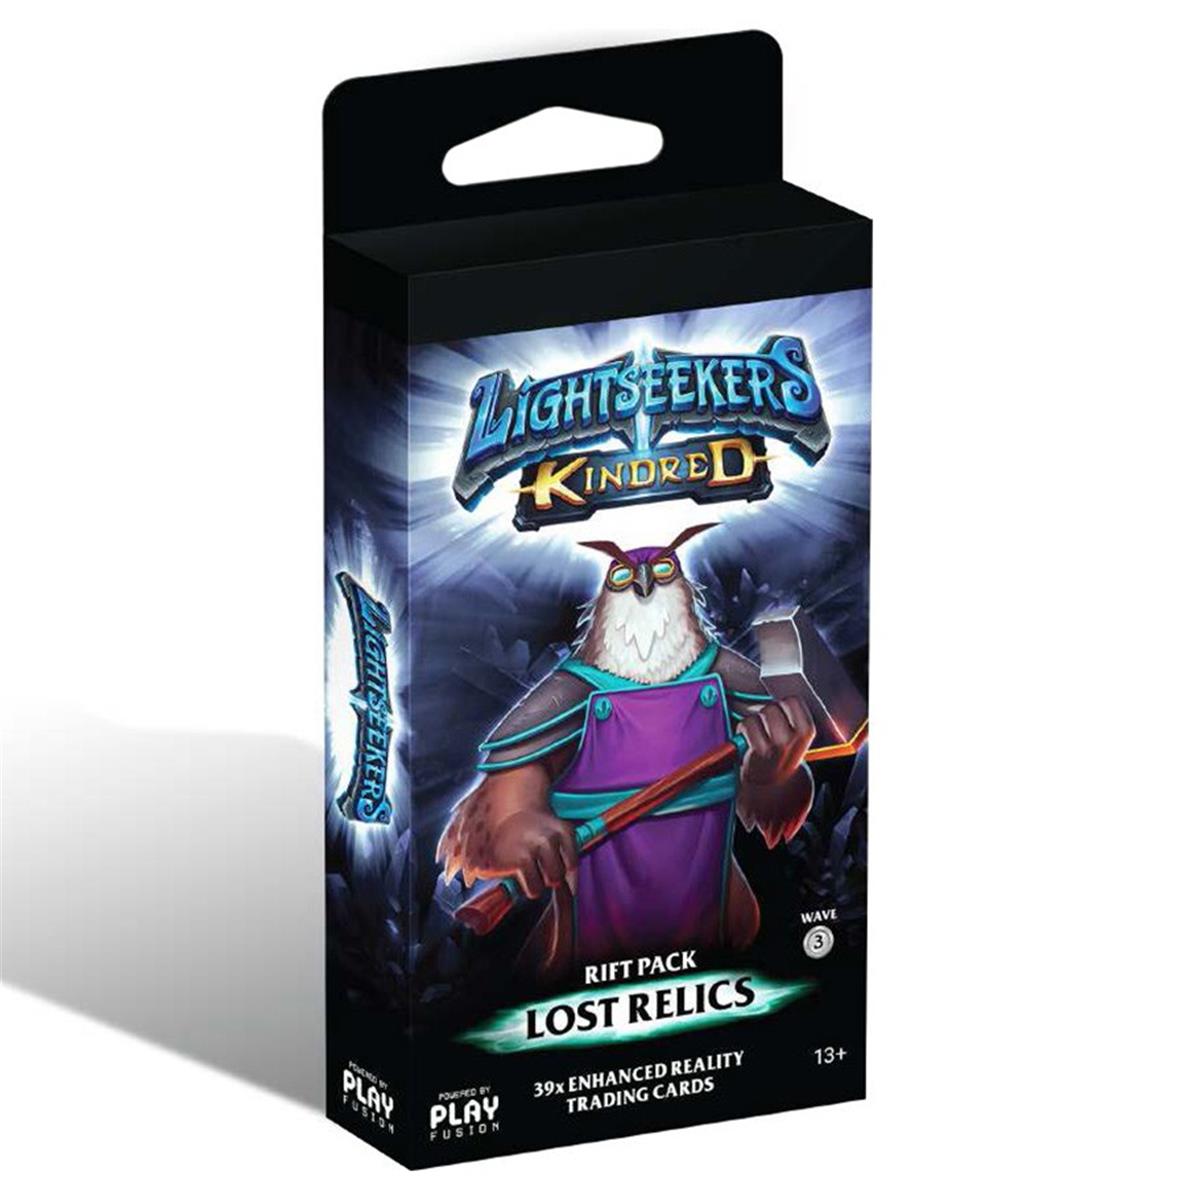 Lightseekers Kindred Rift Pack Lost Relics Card Game